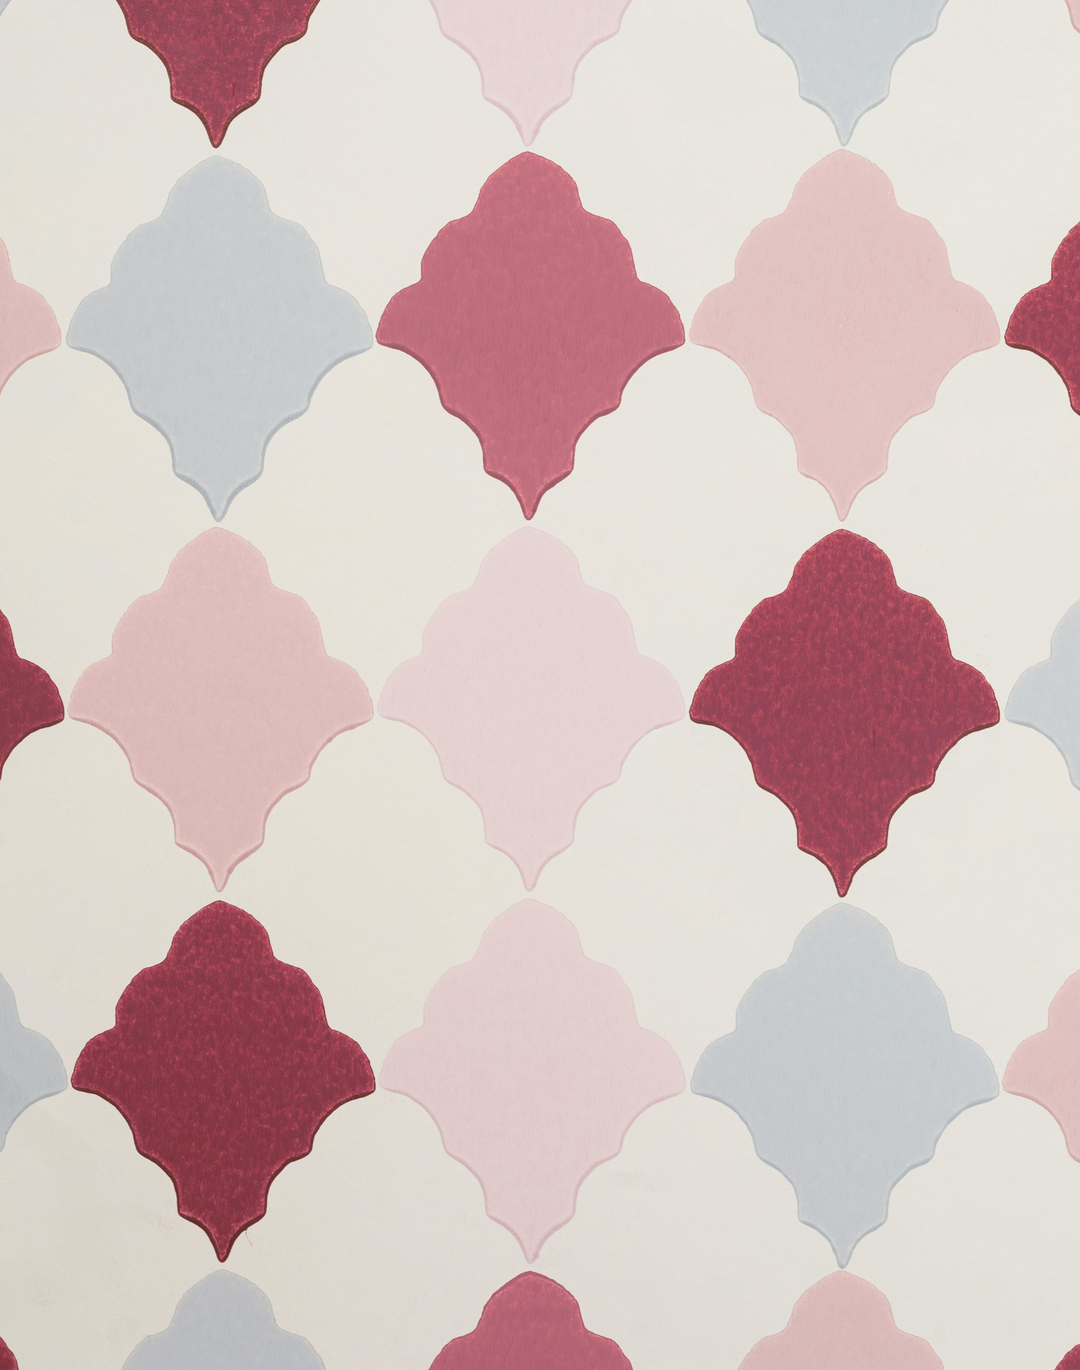 Quilted Harlequin, Patchwork Rose